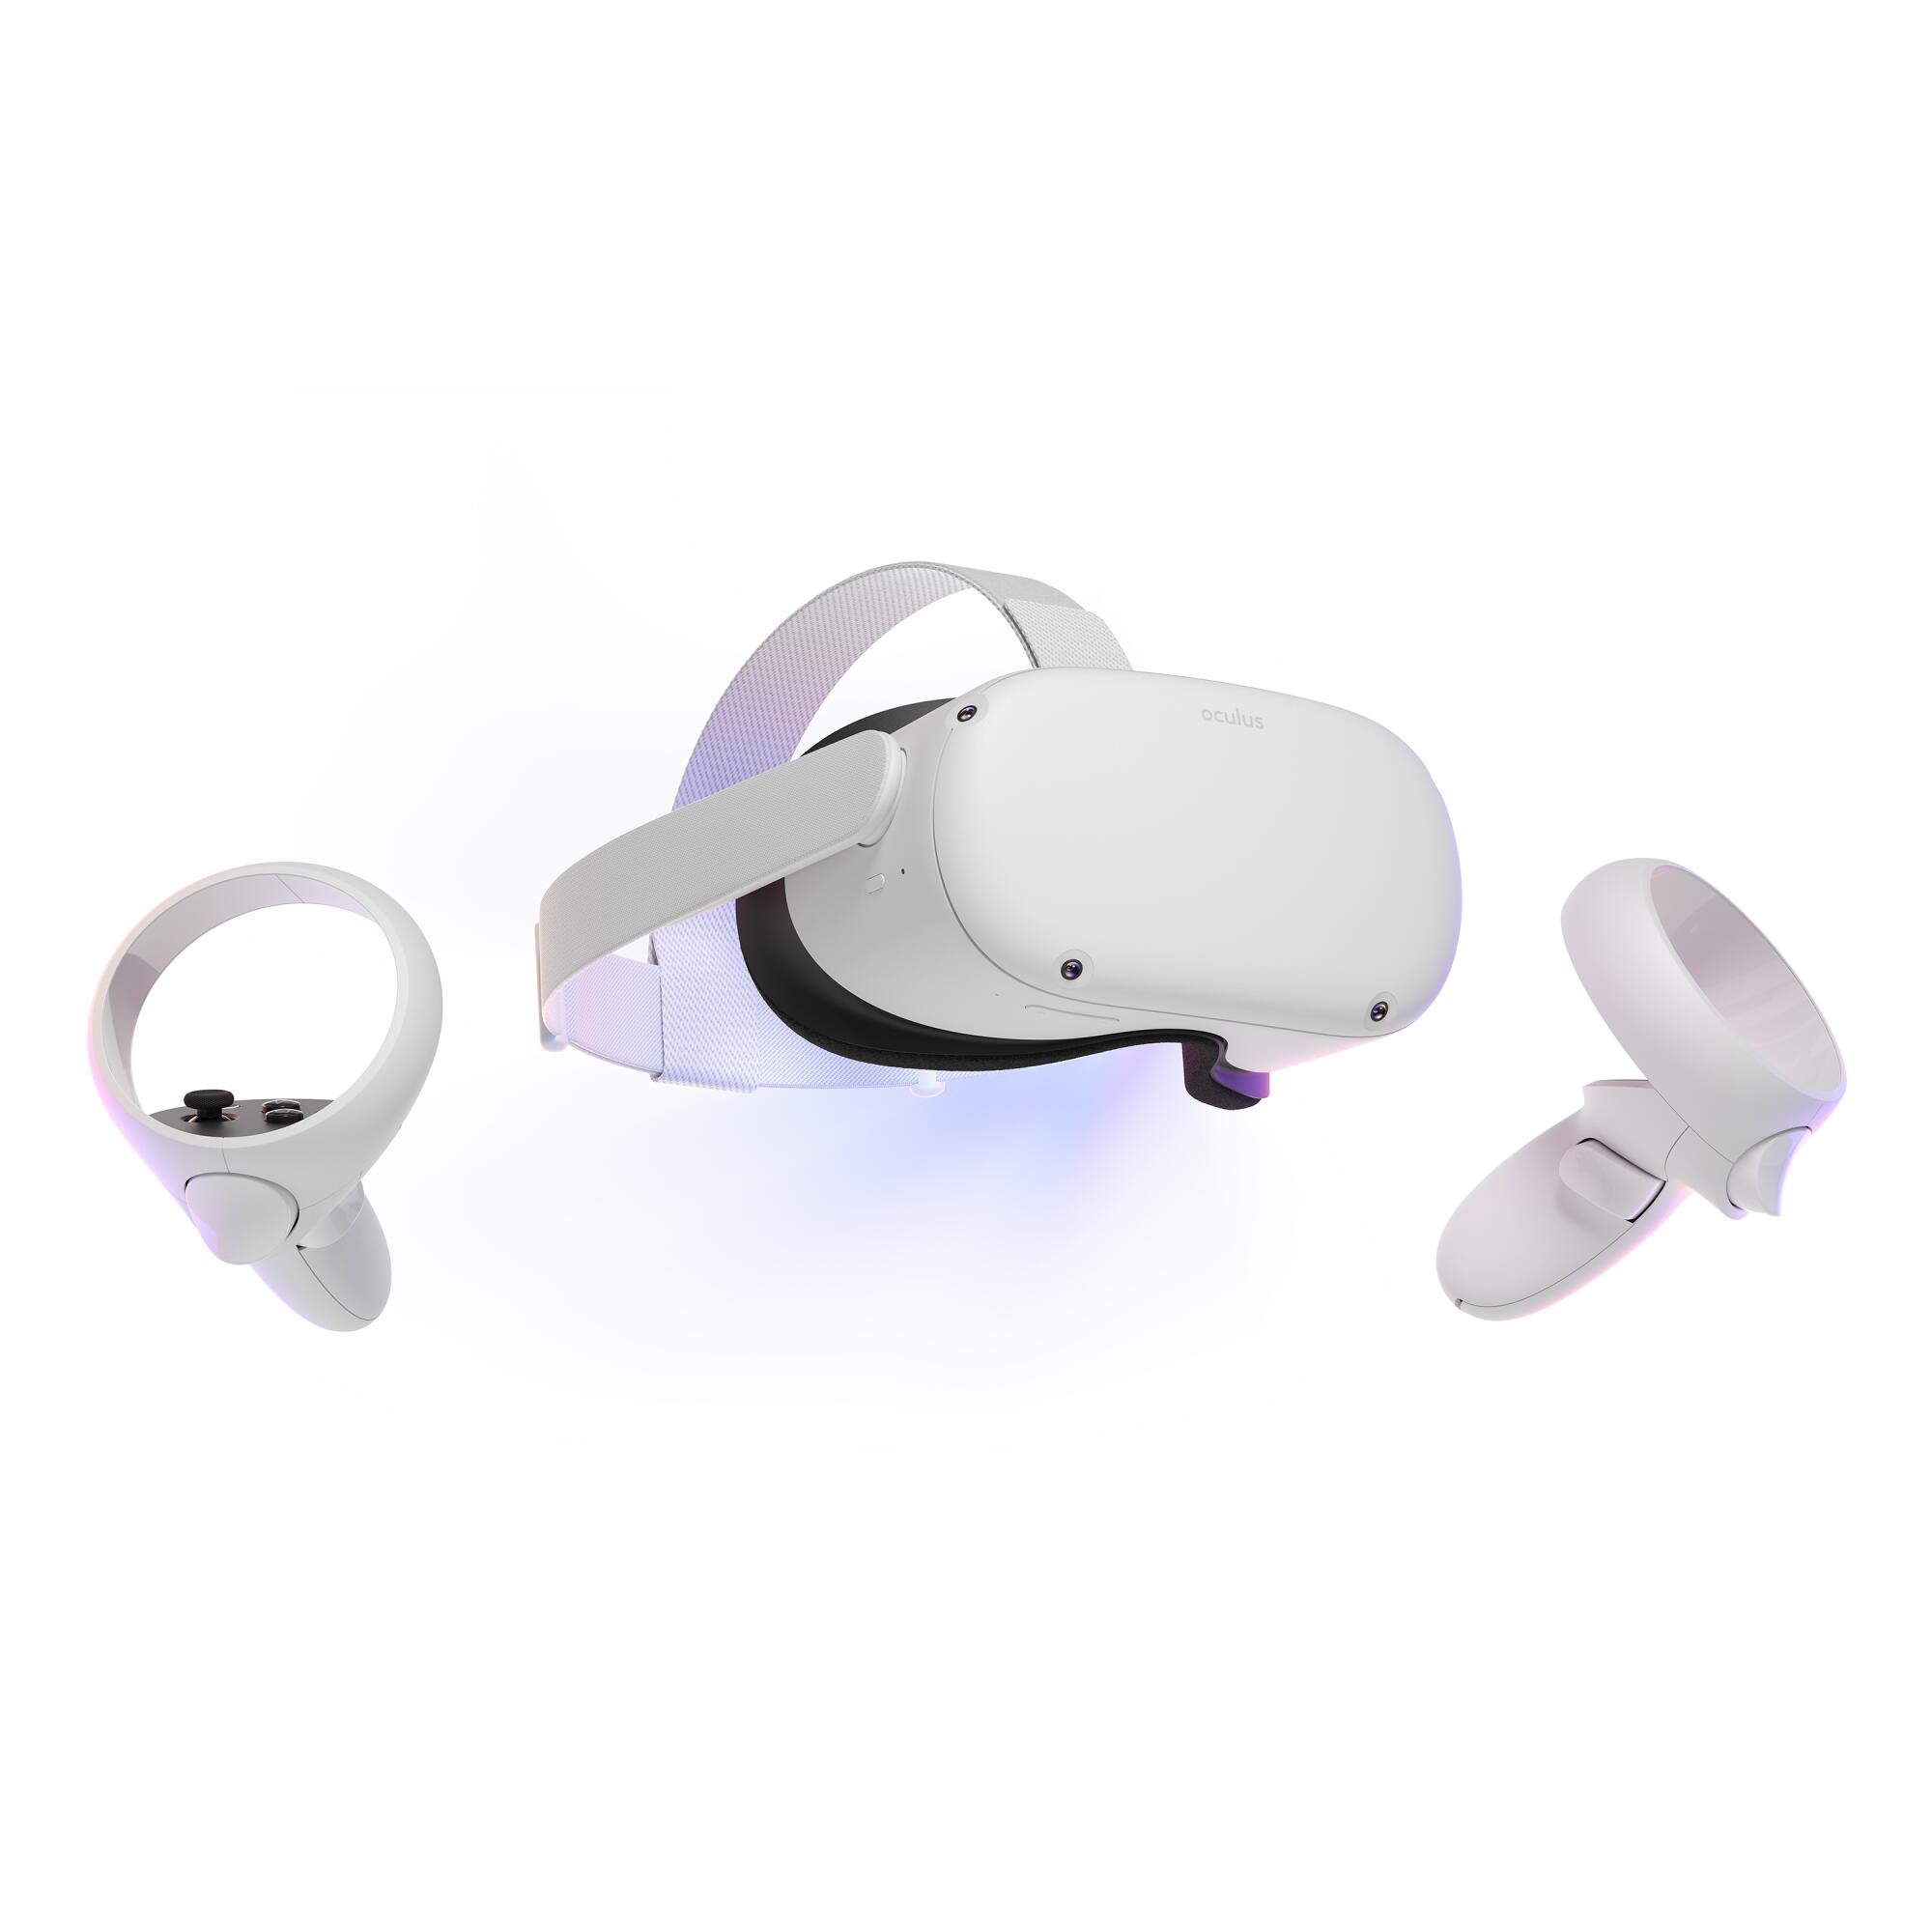 An Oculus Quest 2 headset and two controllers.